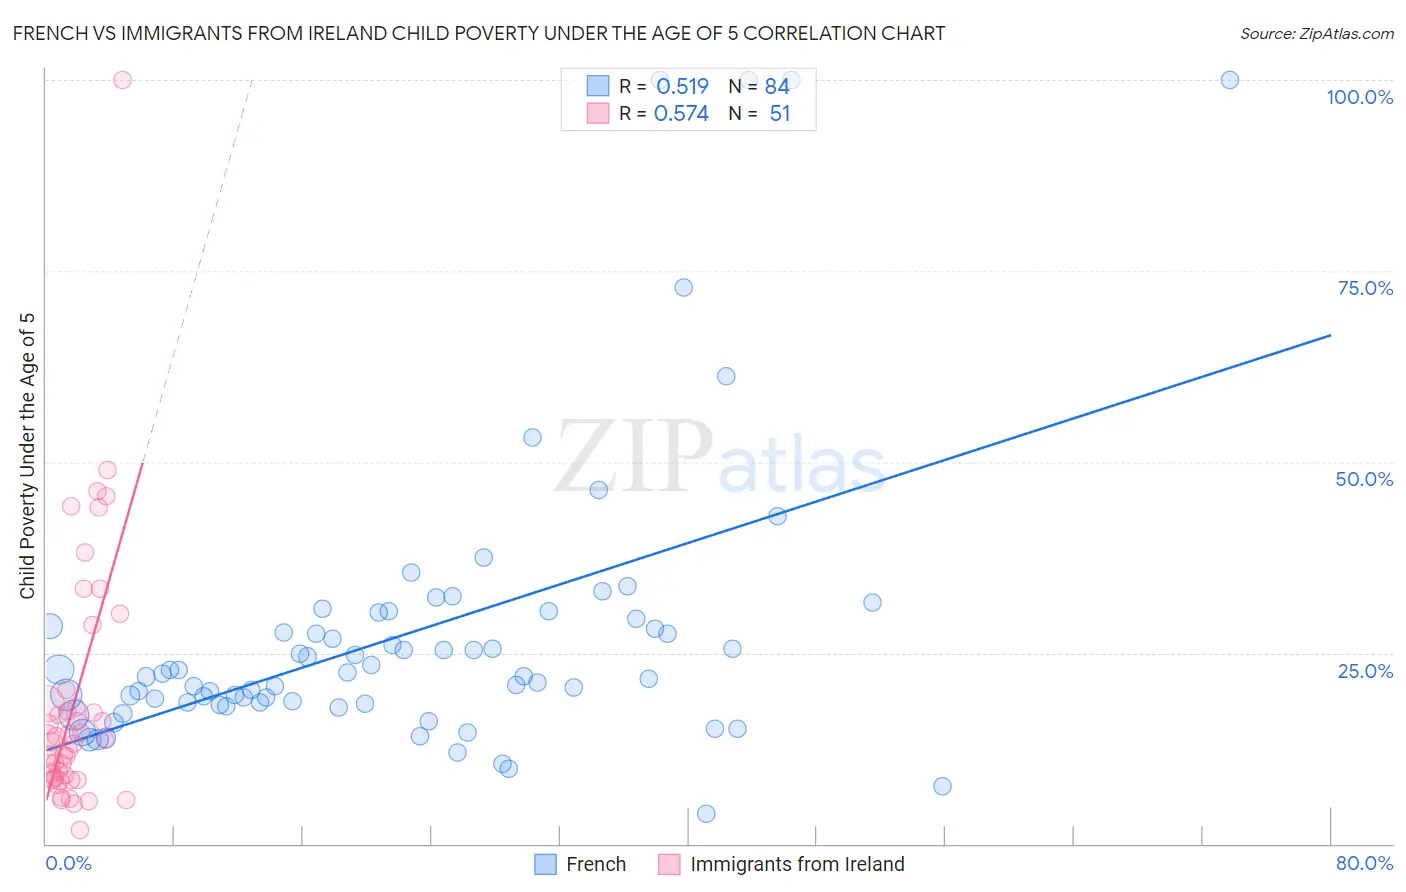 French vs Immigrants from Ireland Child Poverty Under the Age of 5